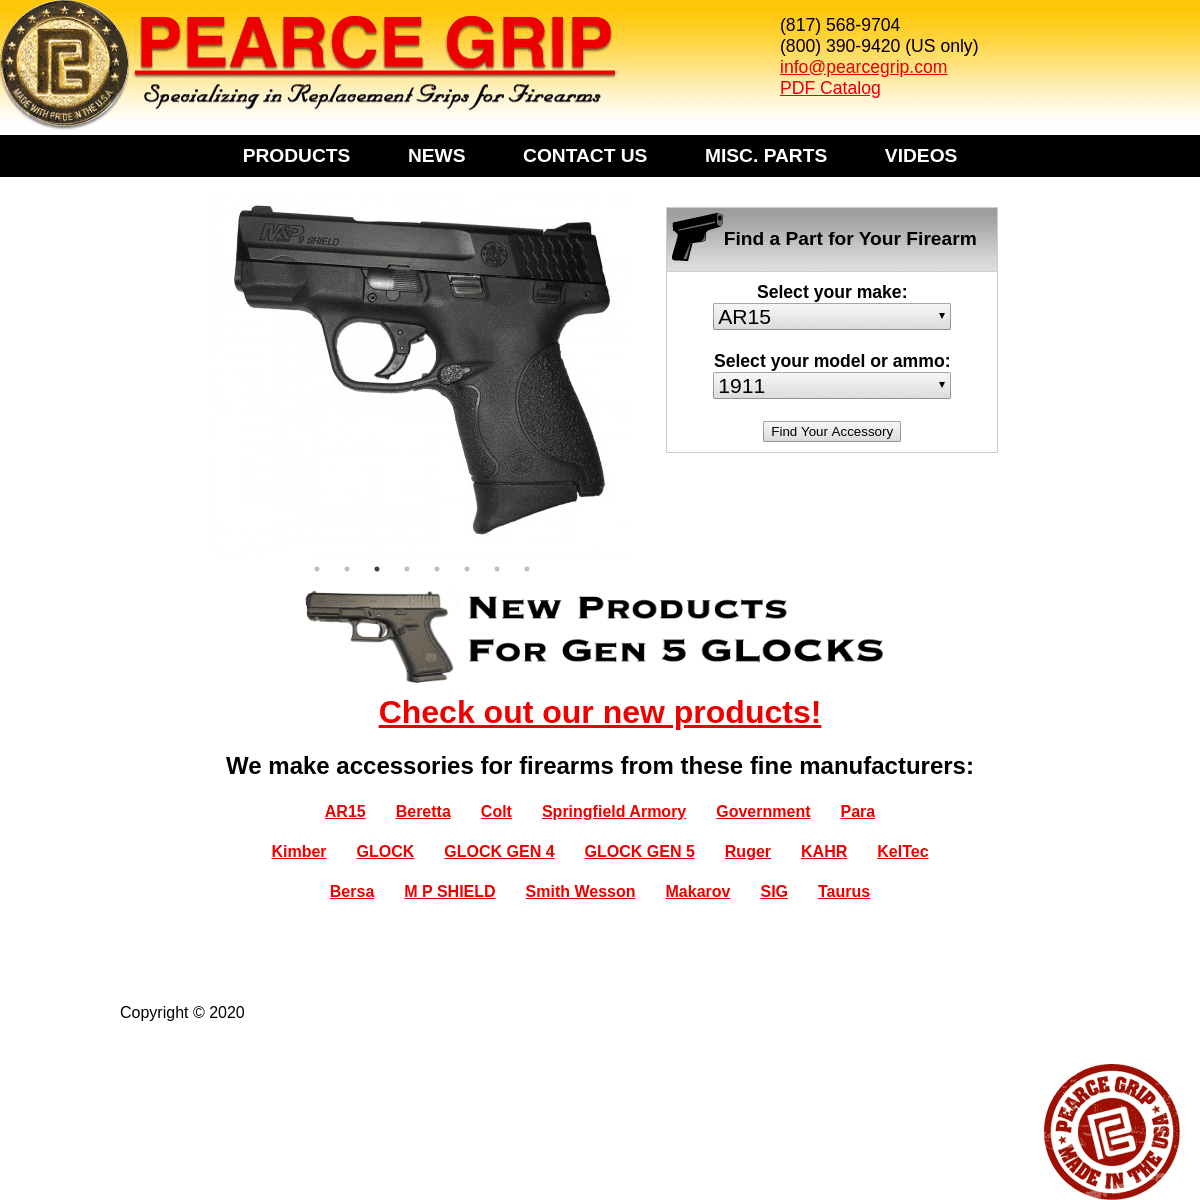 A complete backup of pearcegrip.com